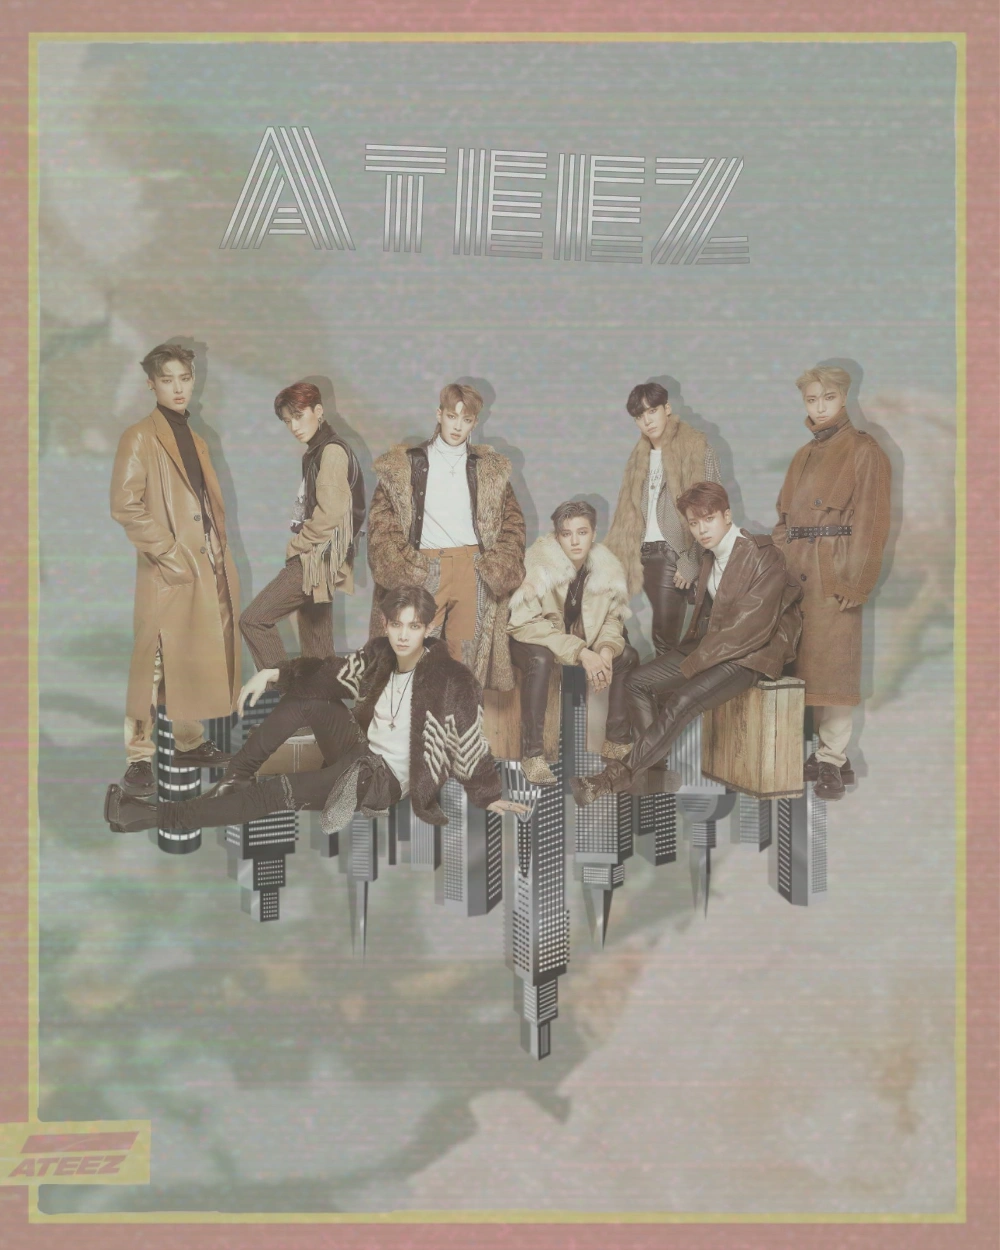 Final Ateez kcon challenge~
This